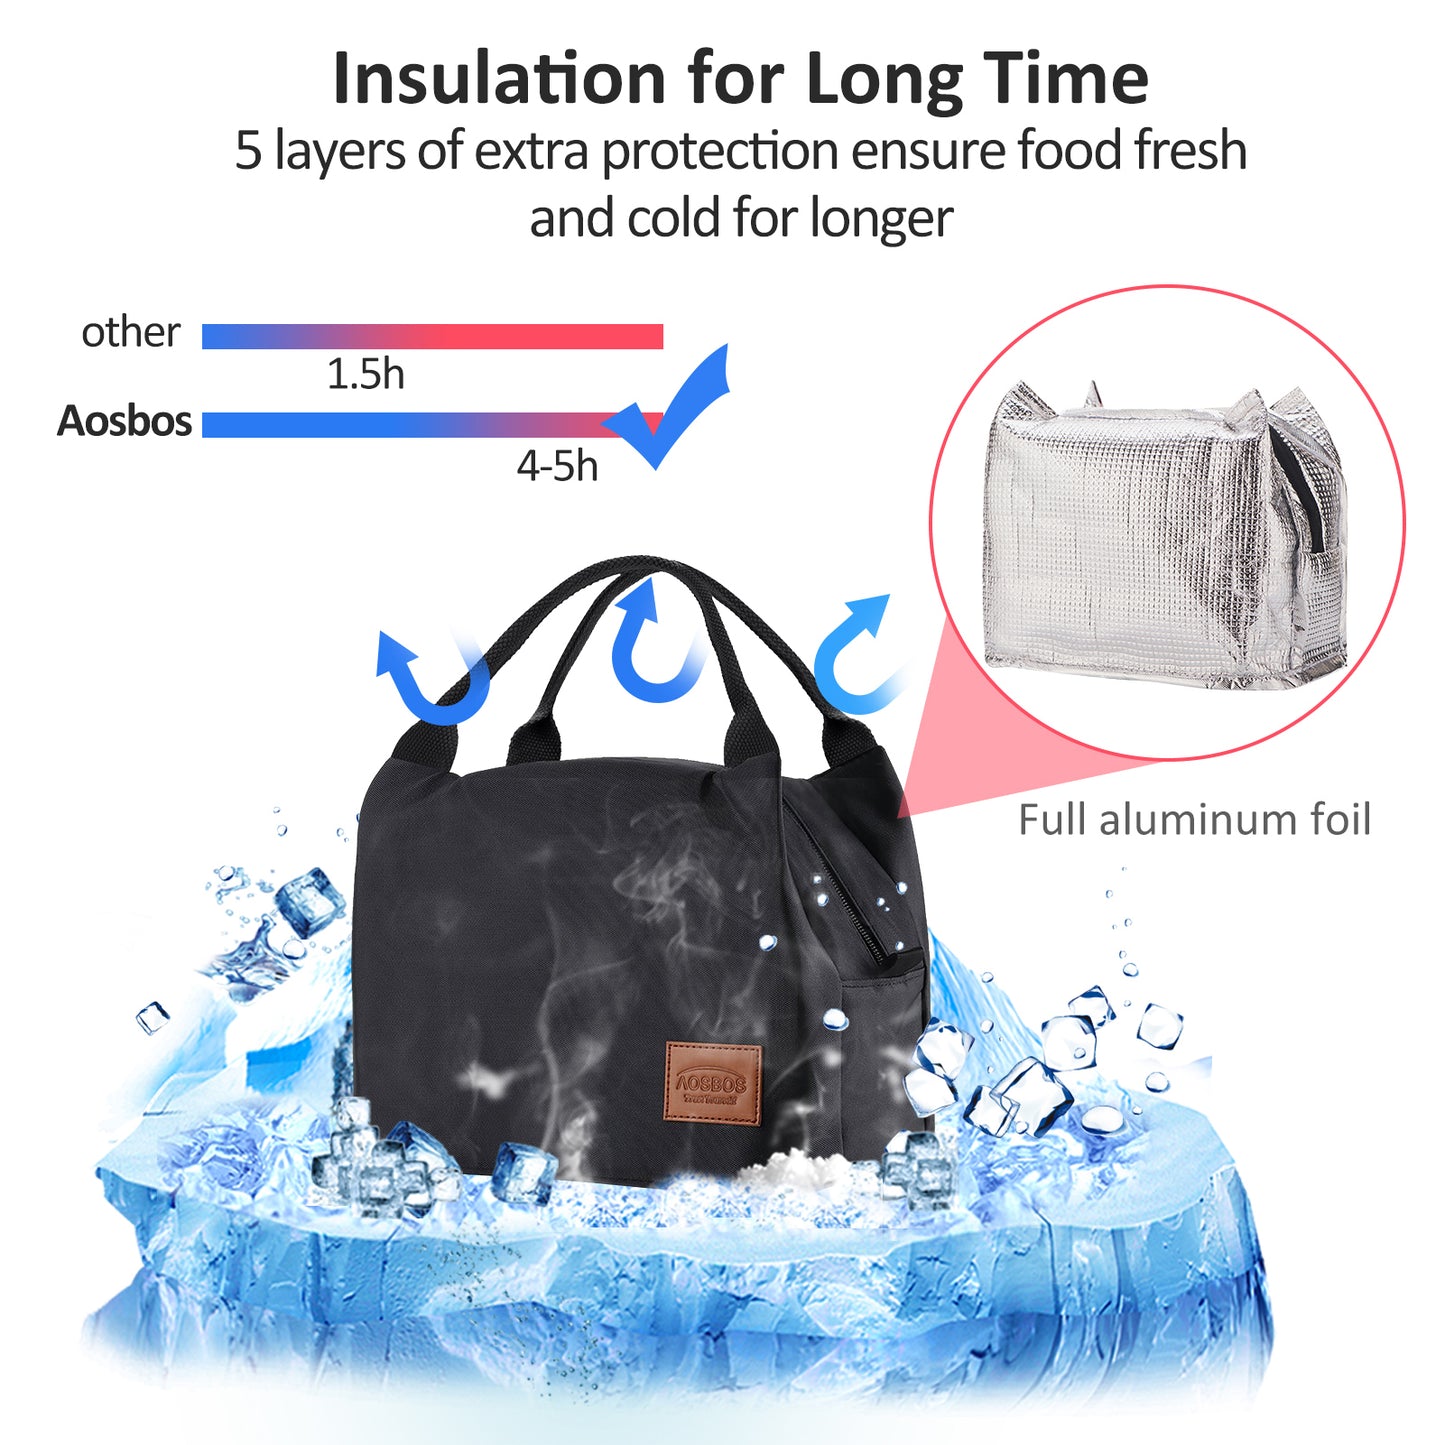 How Do Insulated Lunch Bags Work?